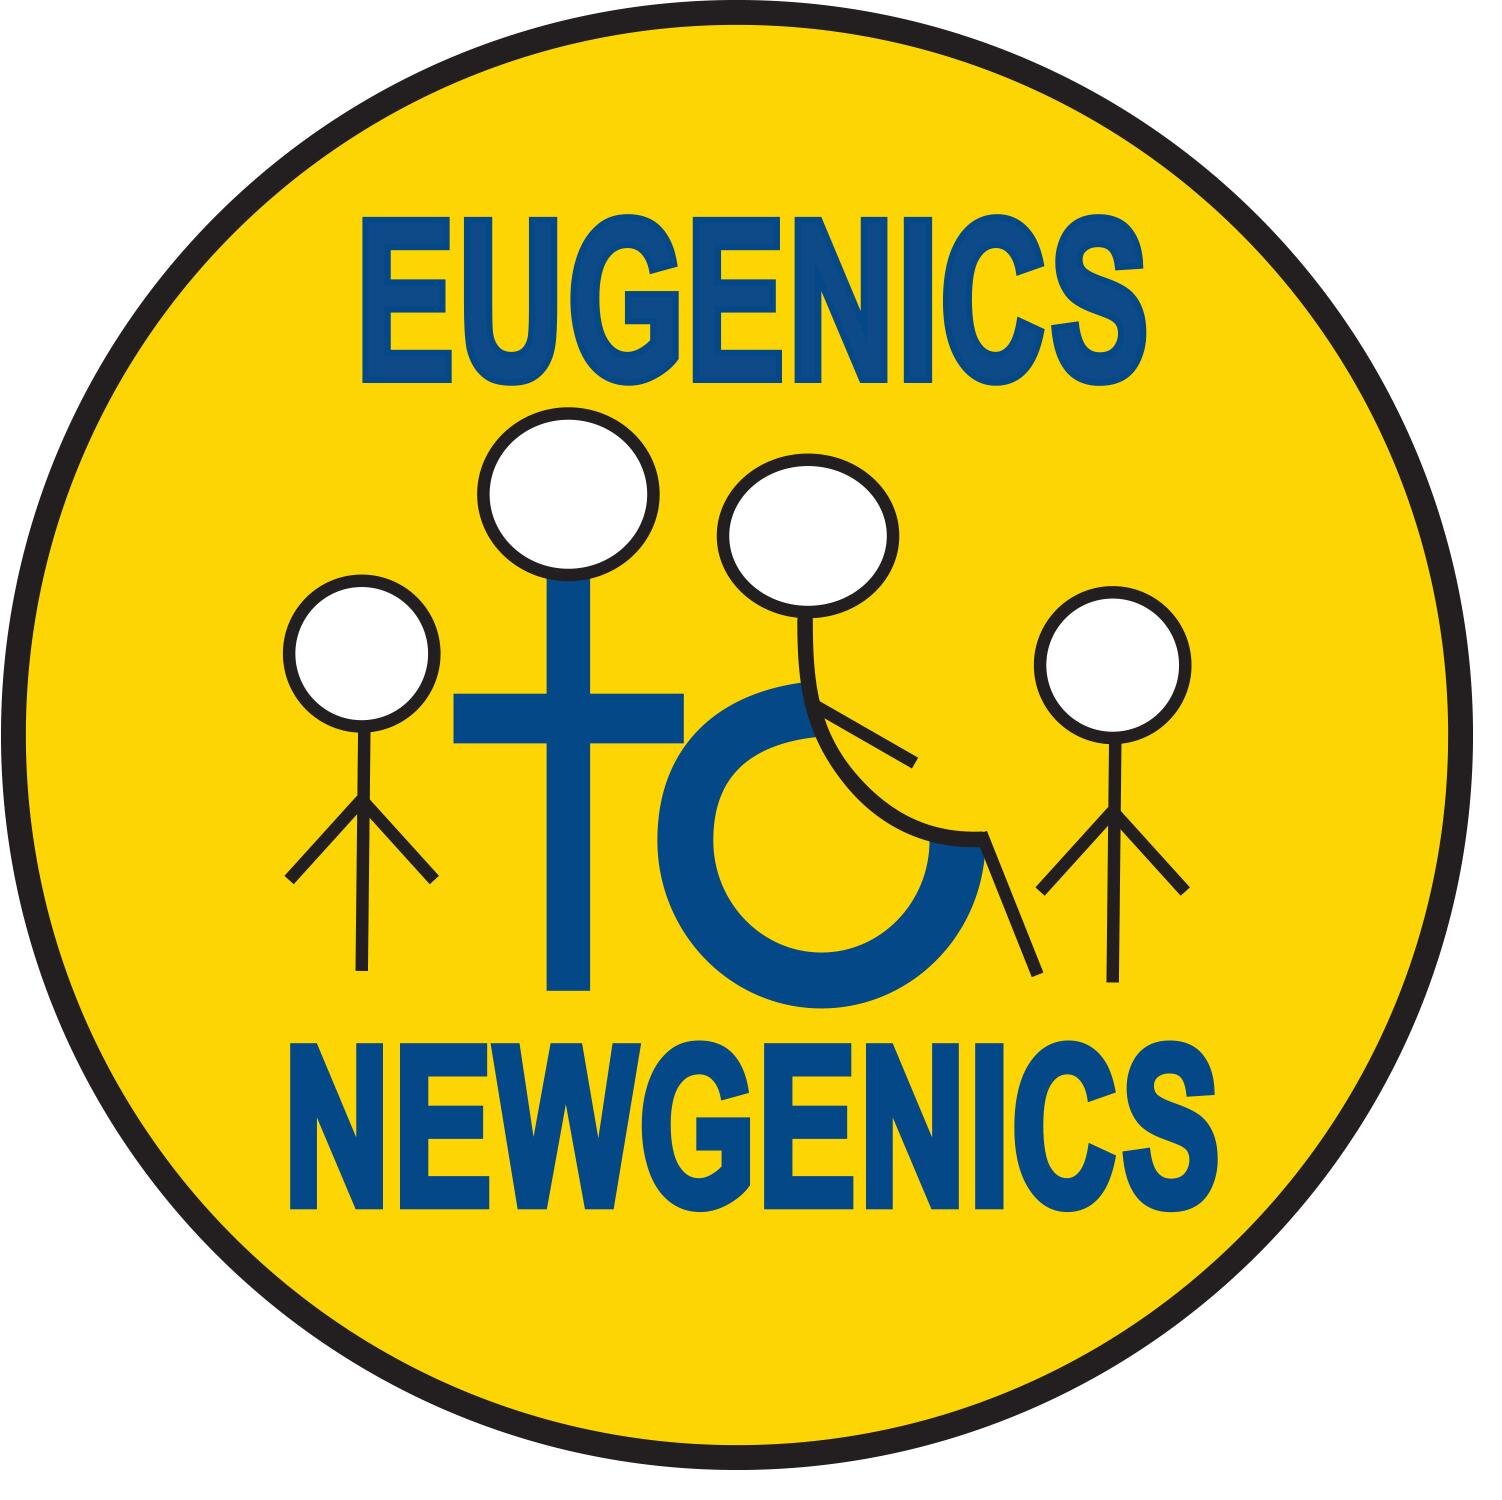 Canadian eugenics, newgenics and sexual & reproductive control - a research project out of the University of Lethbridge headed by Dr. Claudia Malacrida.